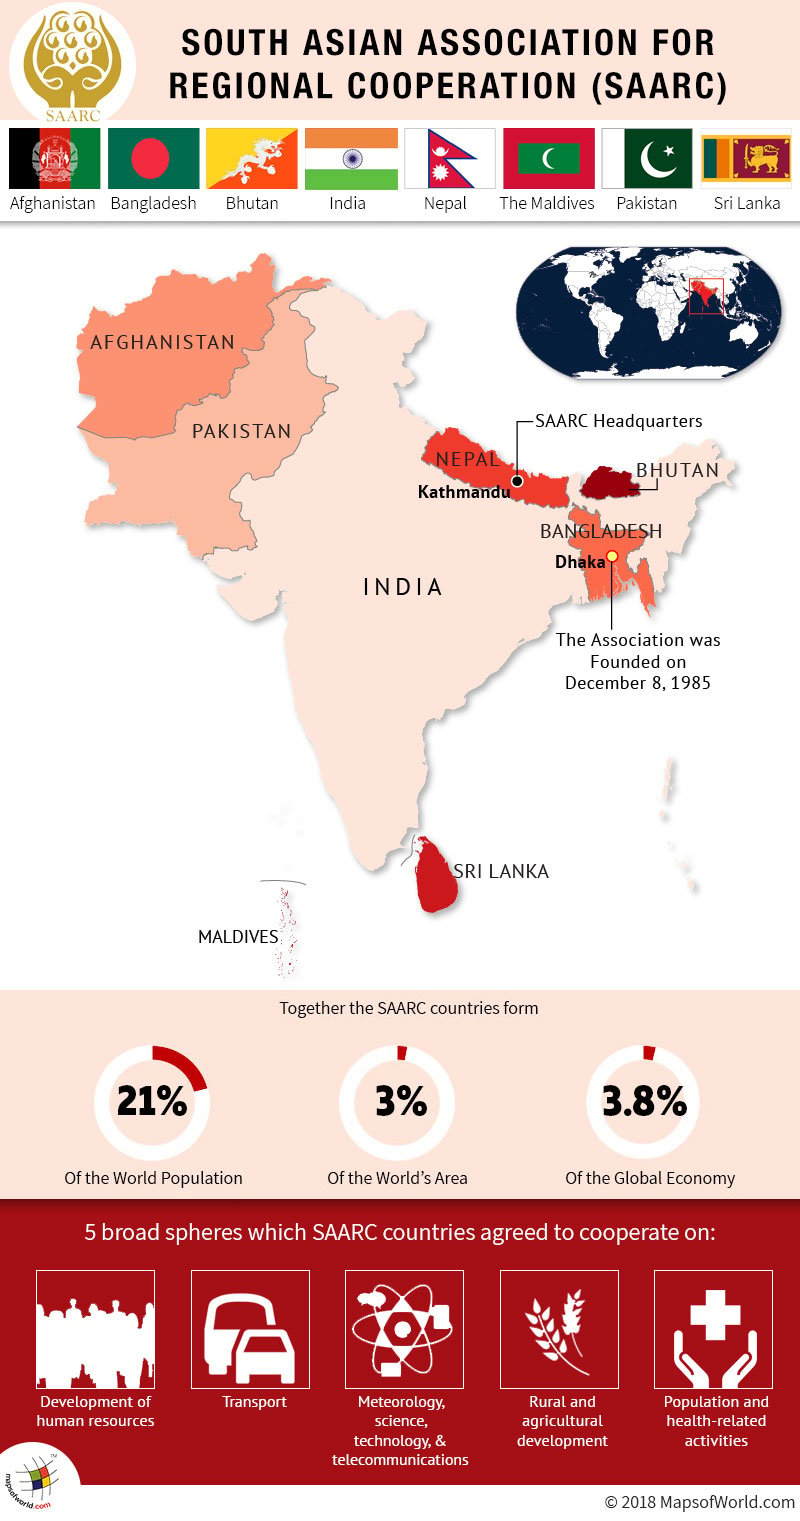 Map and Info on SAARC Member Countries